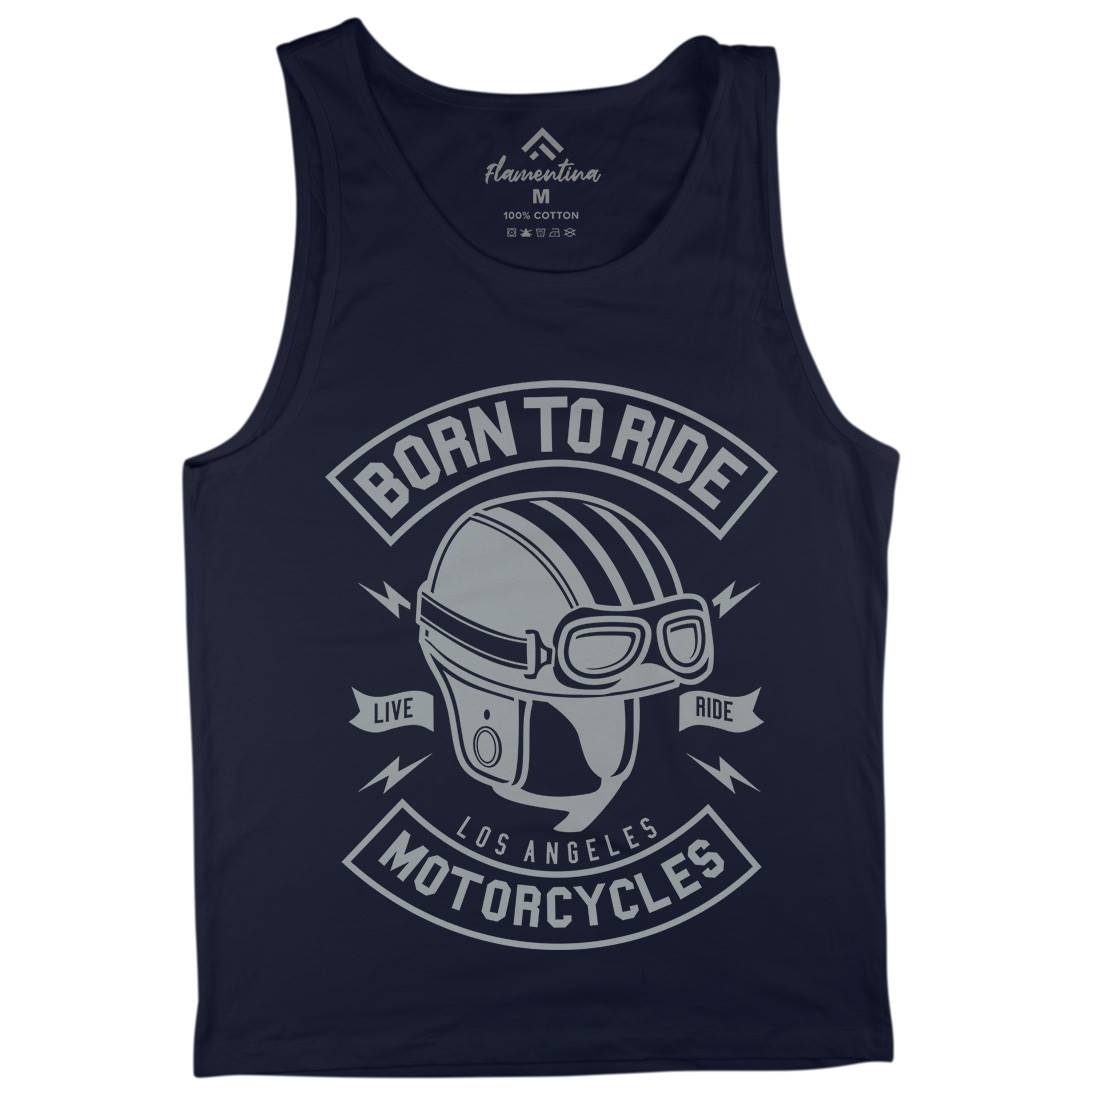 Born To Ride Mens Tank Top Vest Motorcycles A212